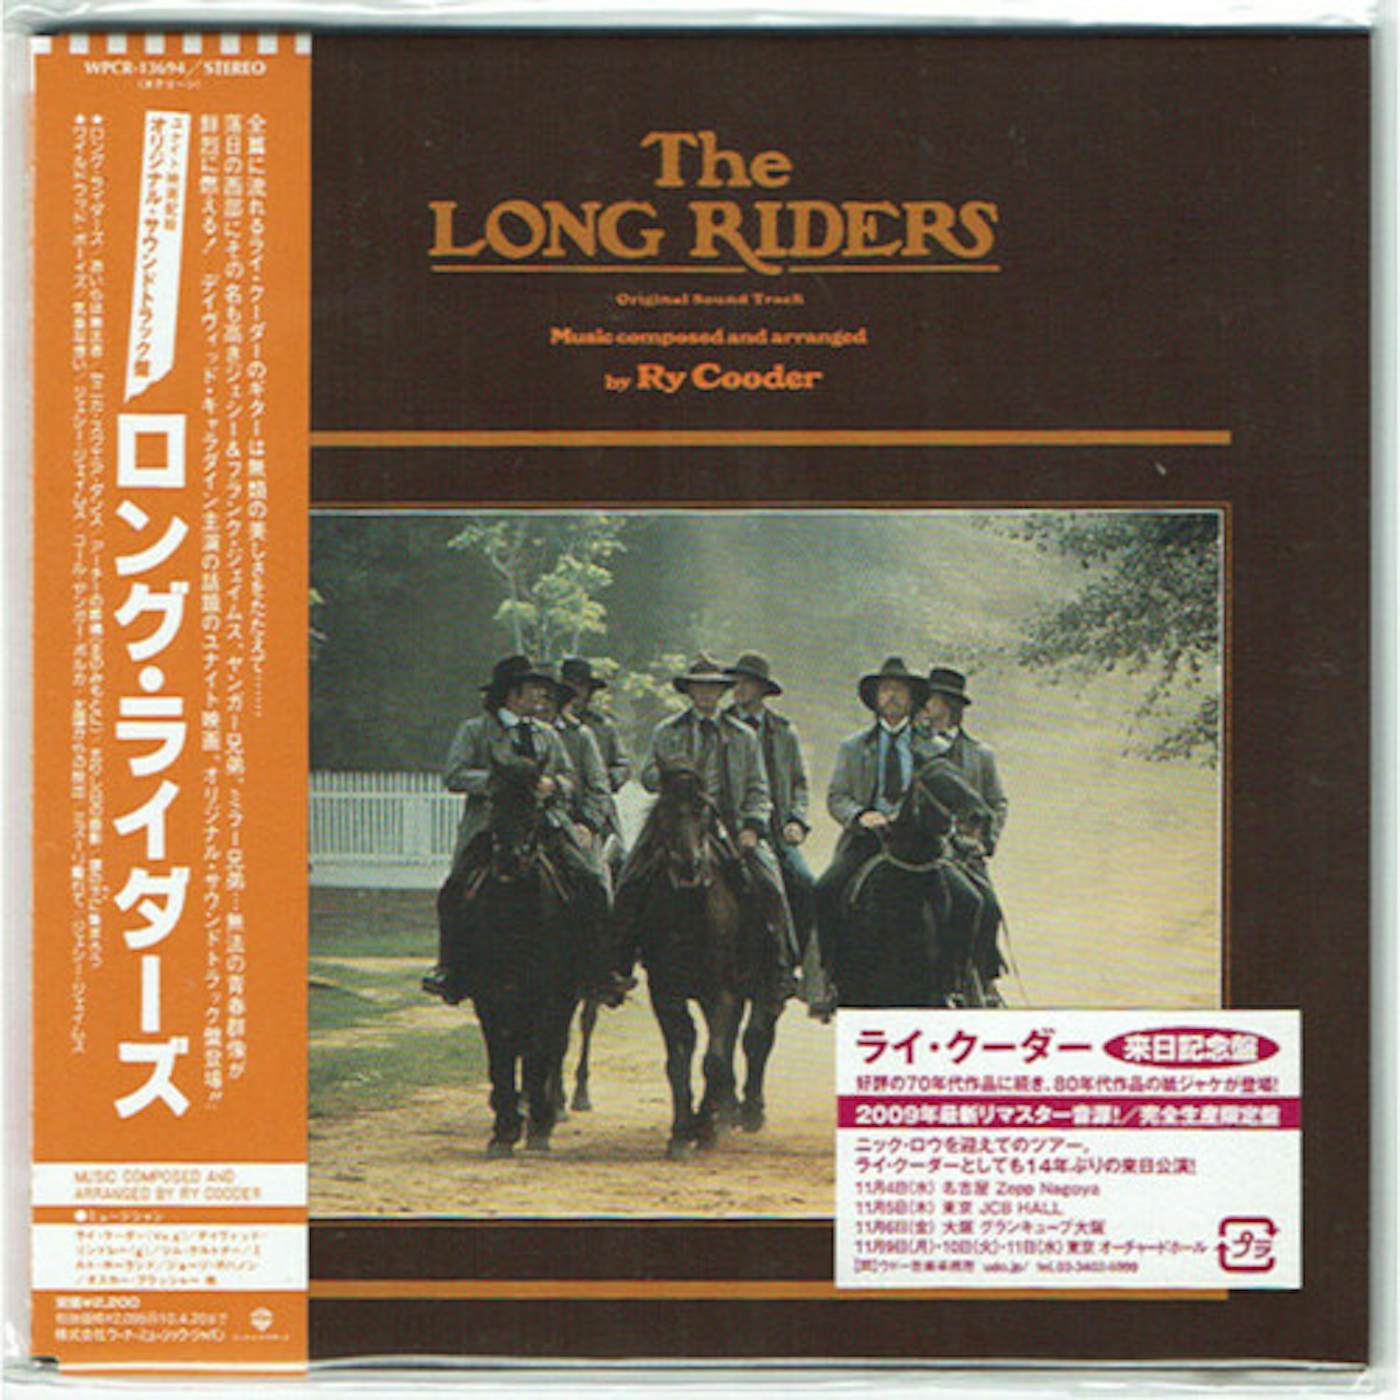 Ry Cooder LONG RIDERS CD